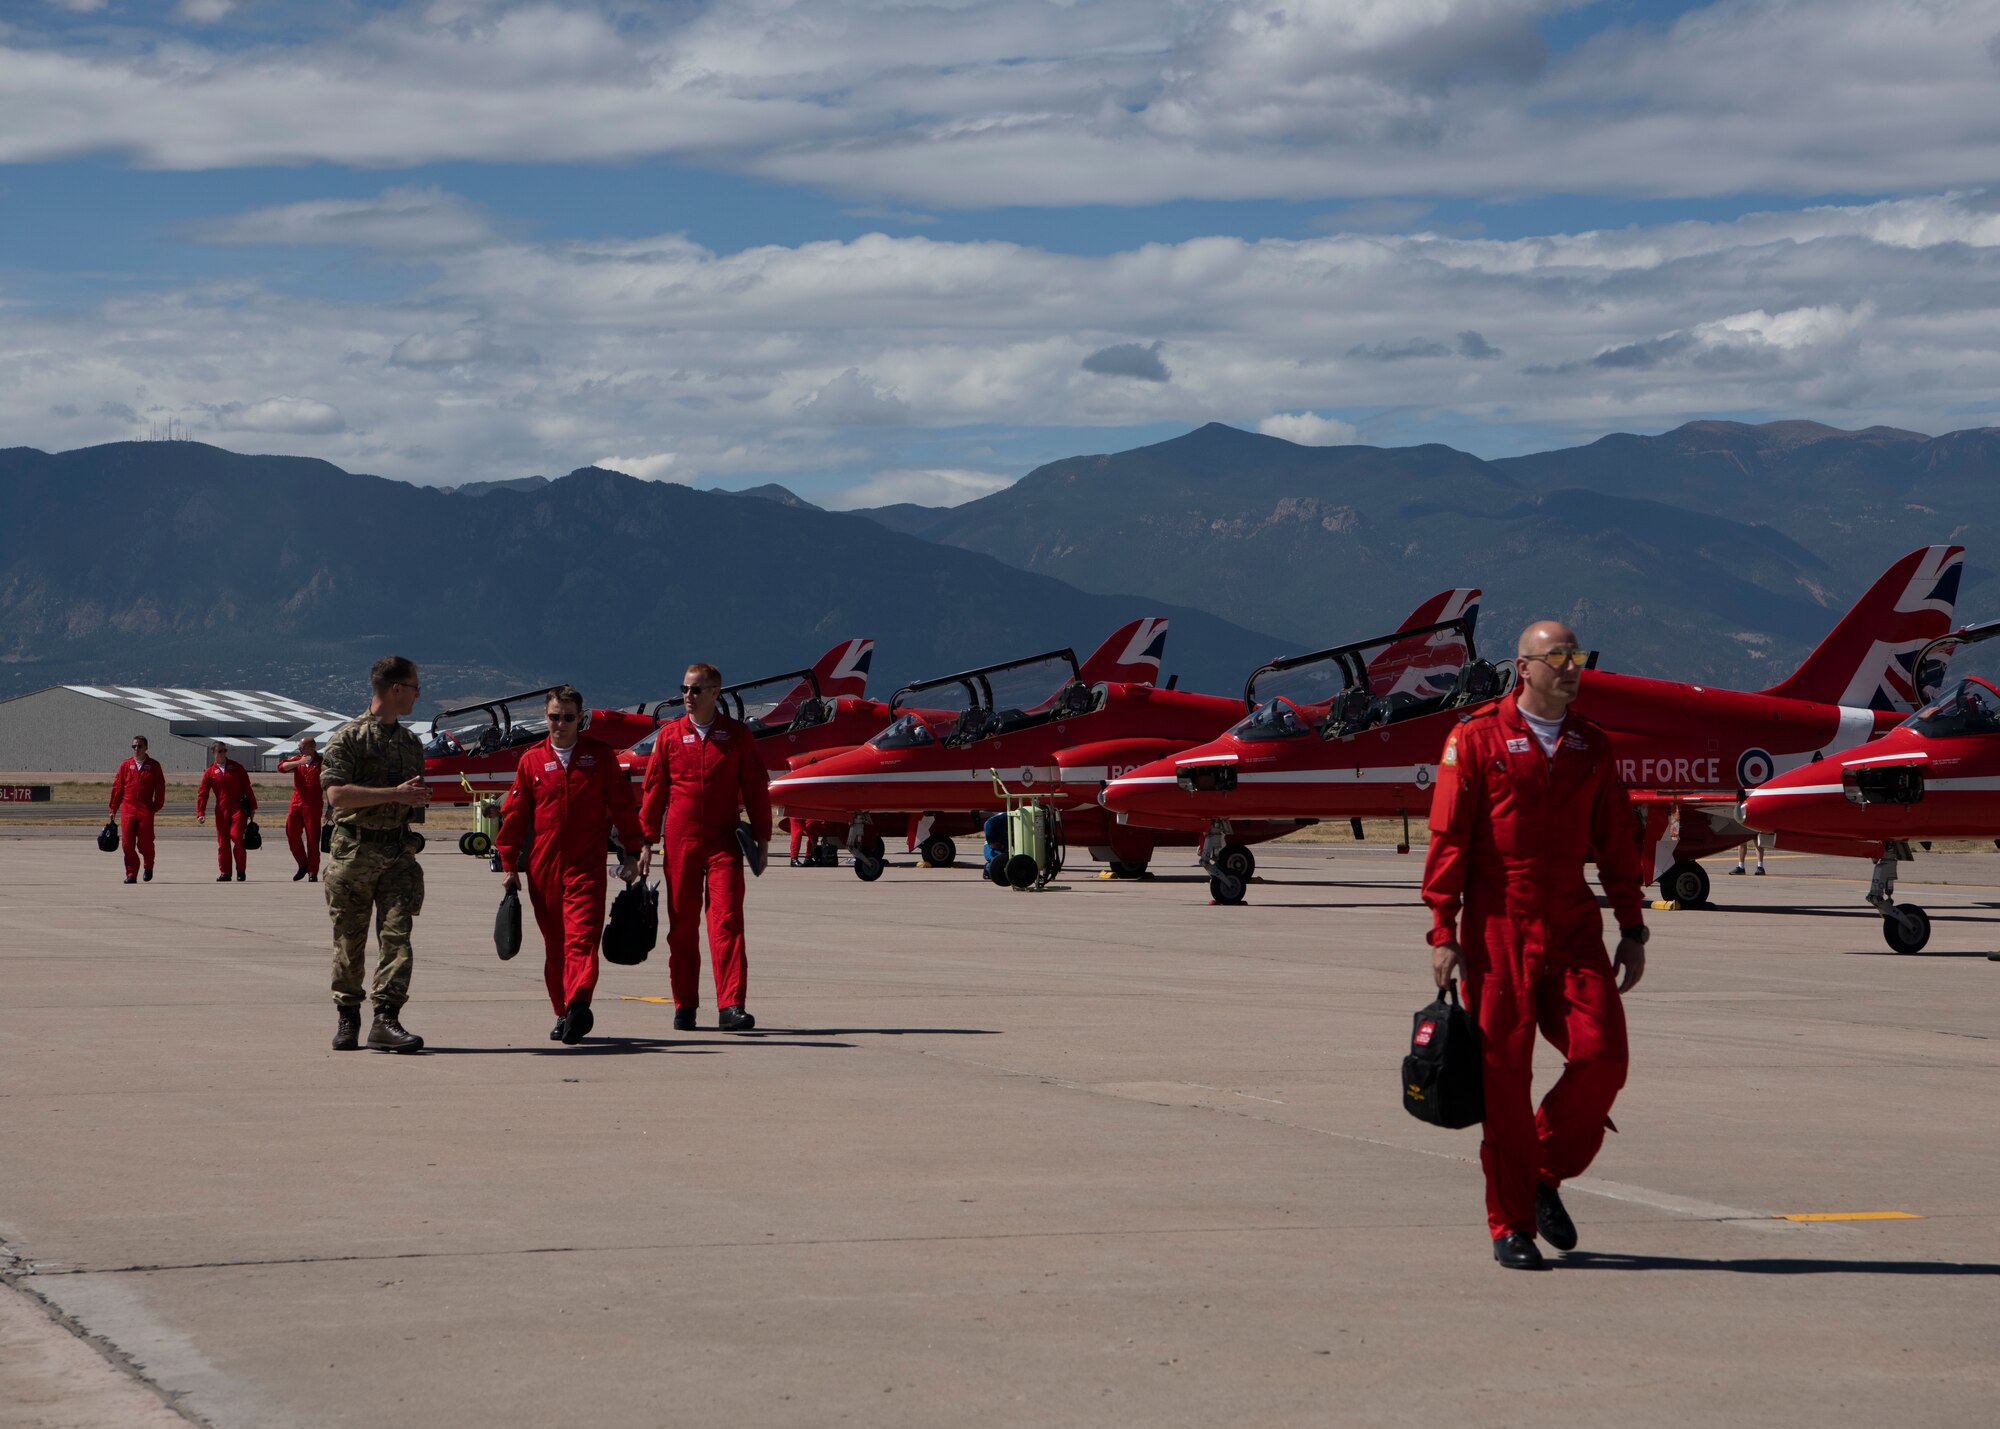 Members of the Royal Air Force aerial demonstration team, the Red Arrows, walk across the Peterson Air Force Base, Colorado, flight line Sept. 16, 2019. The team stopped at Peterson AFB as part of their North American tour. (U.S. Air Force photo by Heather Heiney)